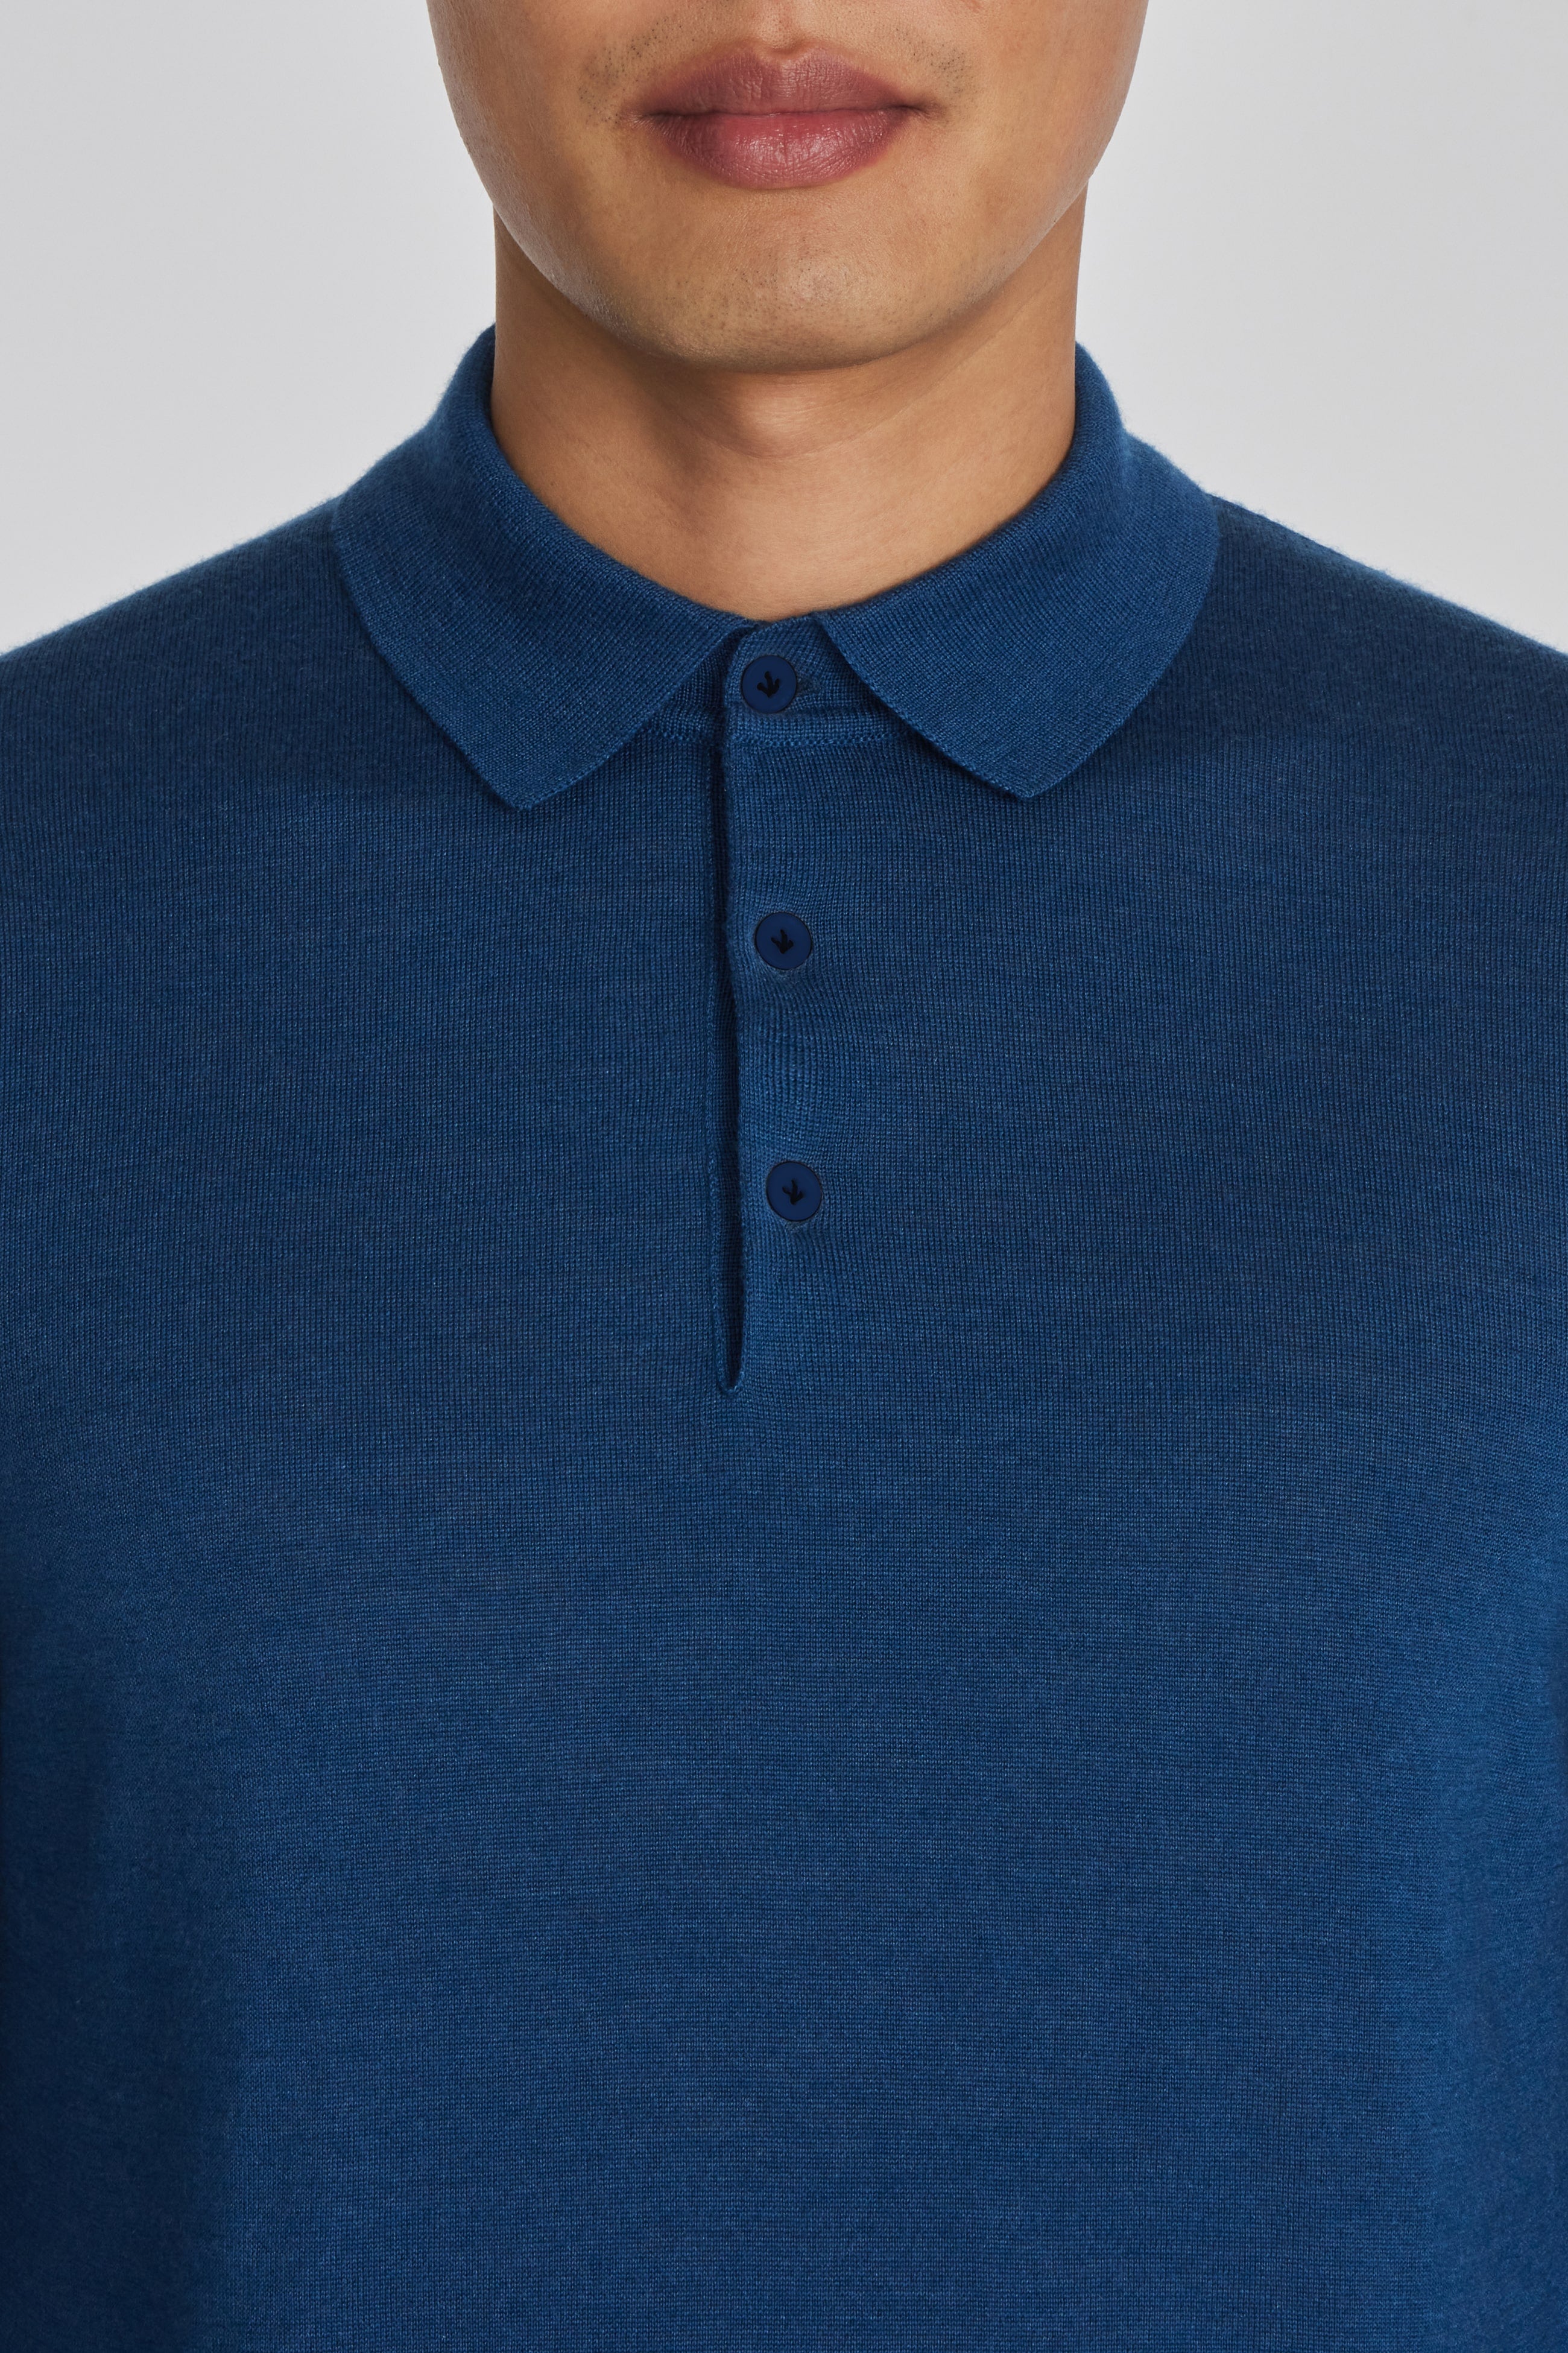 Alt view 1 Redfern Wool, Silk and Cashmere Long Sleeve Polo in Blue